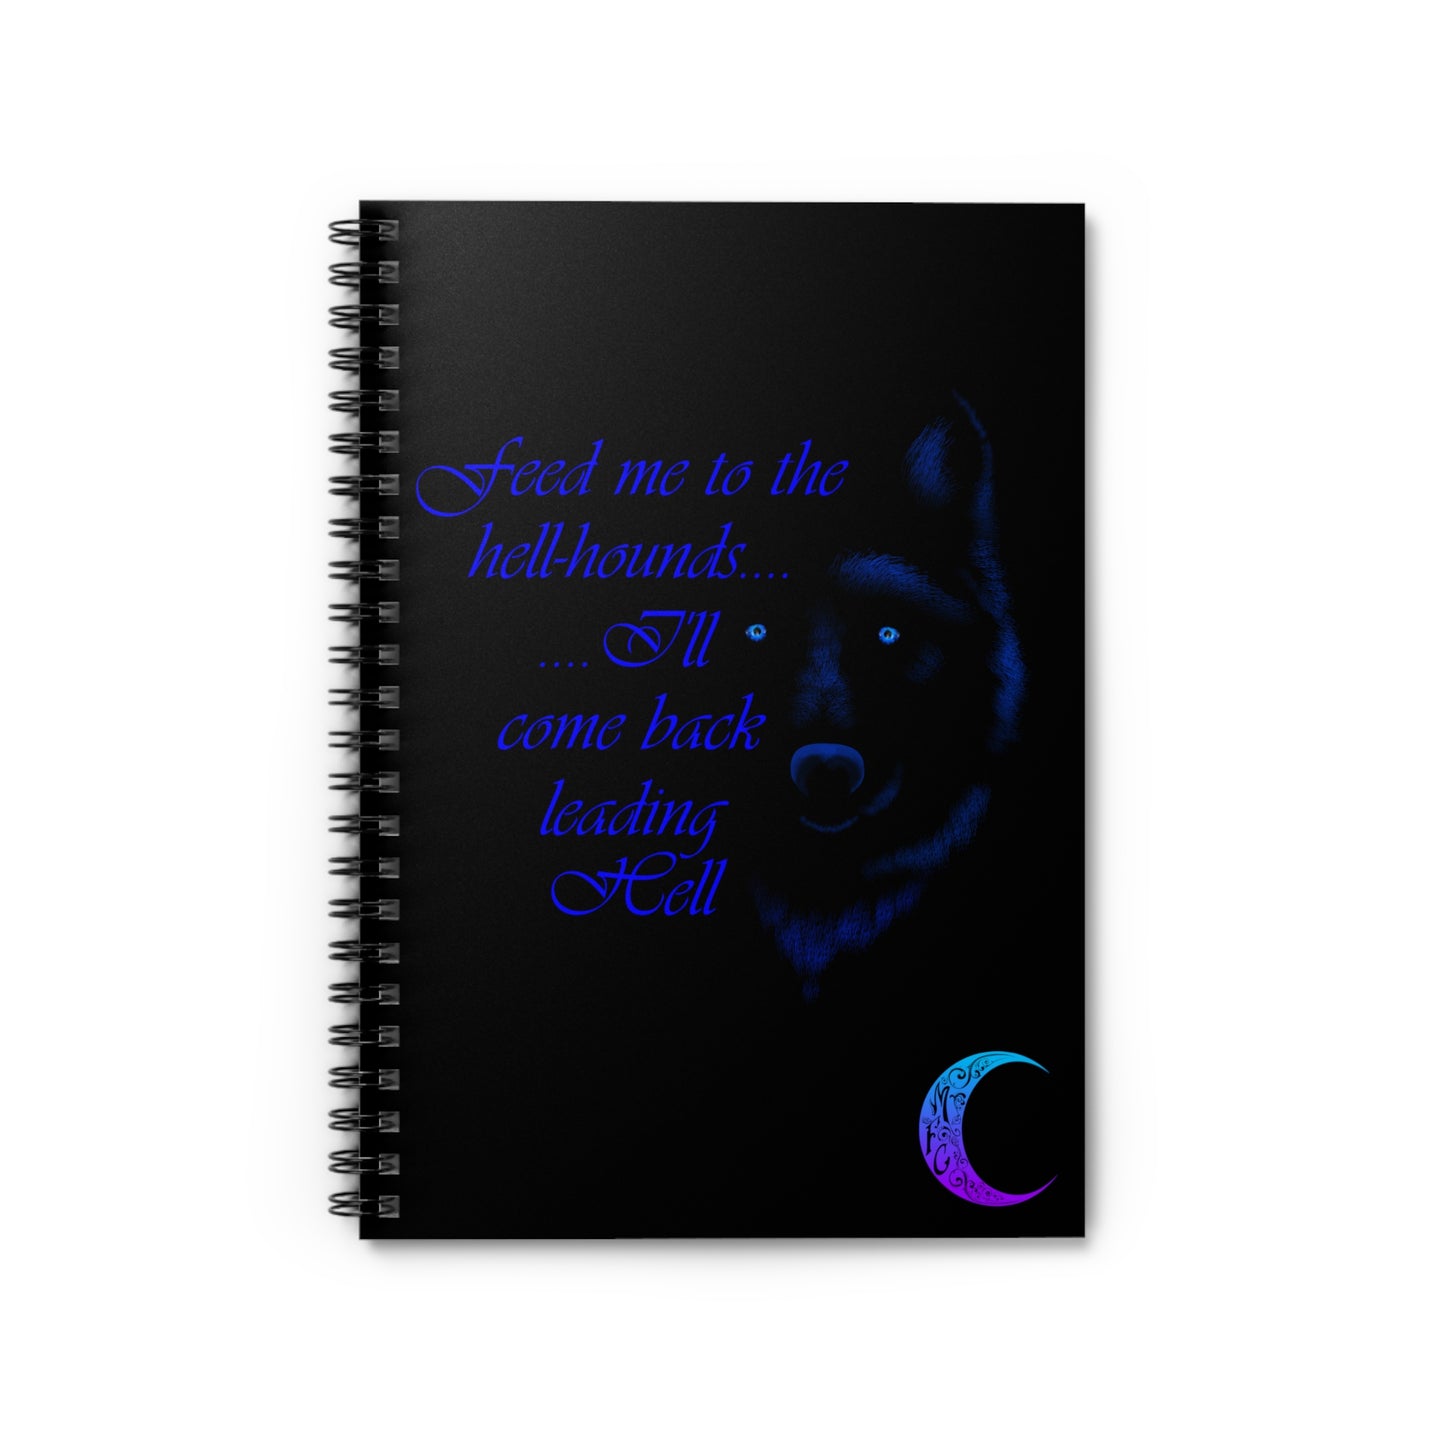 Feed Me to the Hellhounds (Spiral Notebook - Ruled Line)